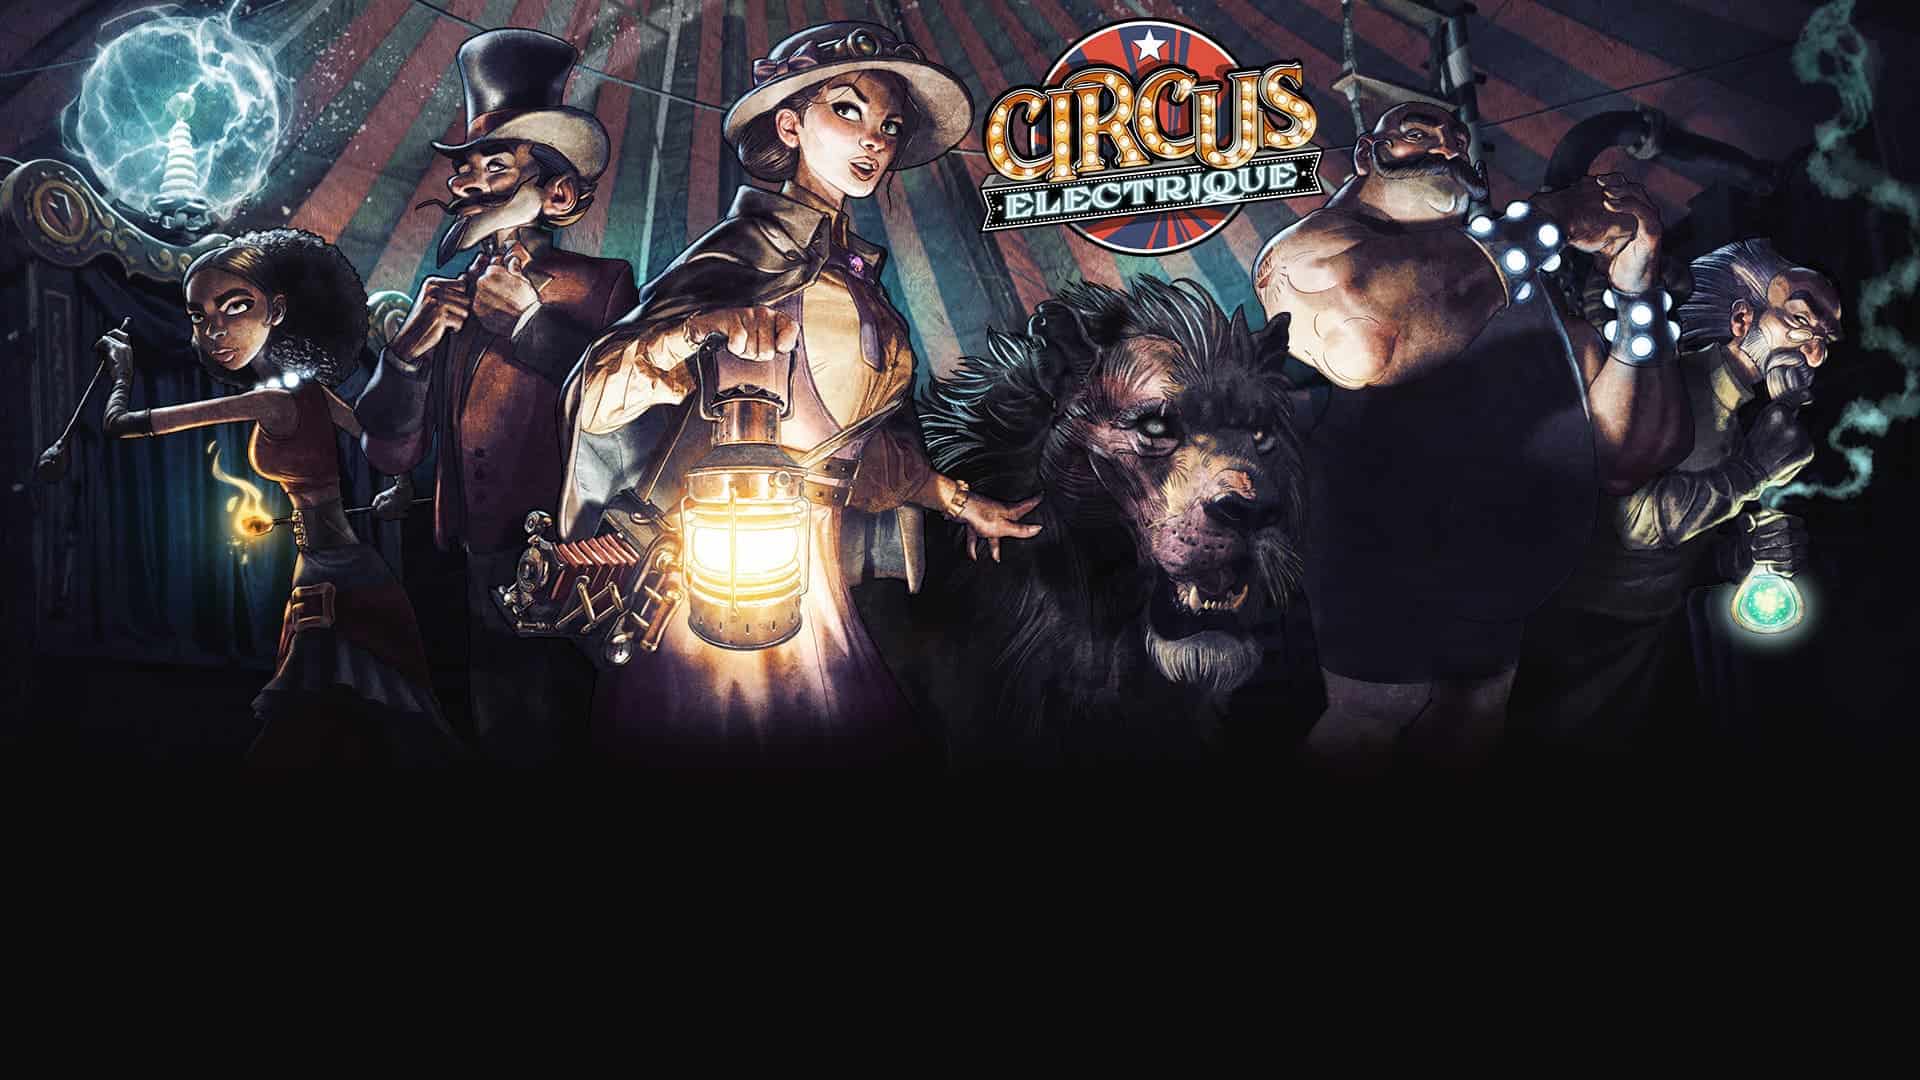 Circus Electrique free game on Epic Games Store